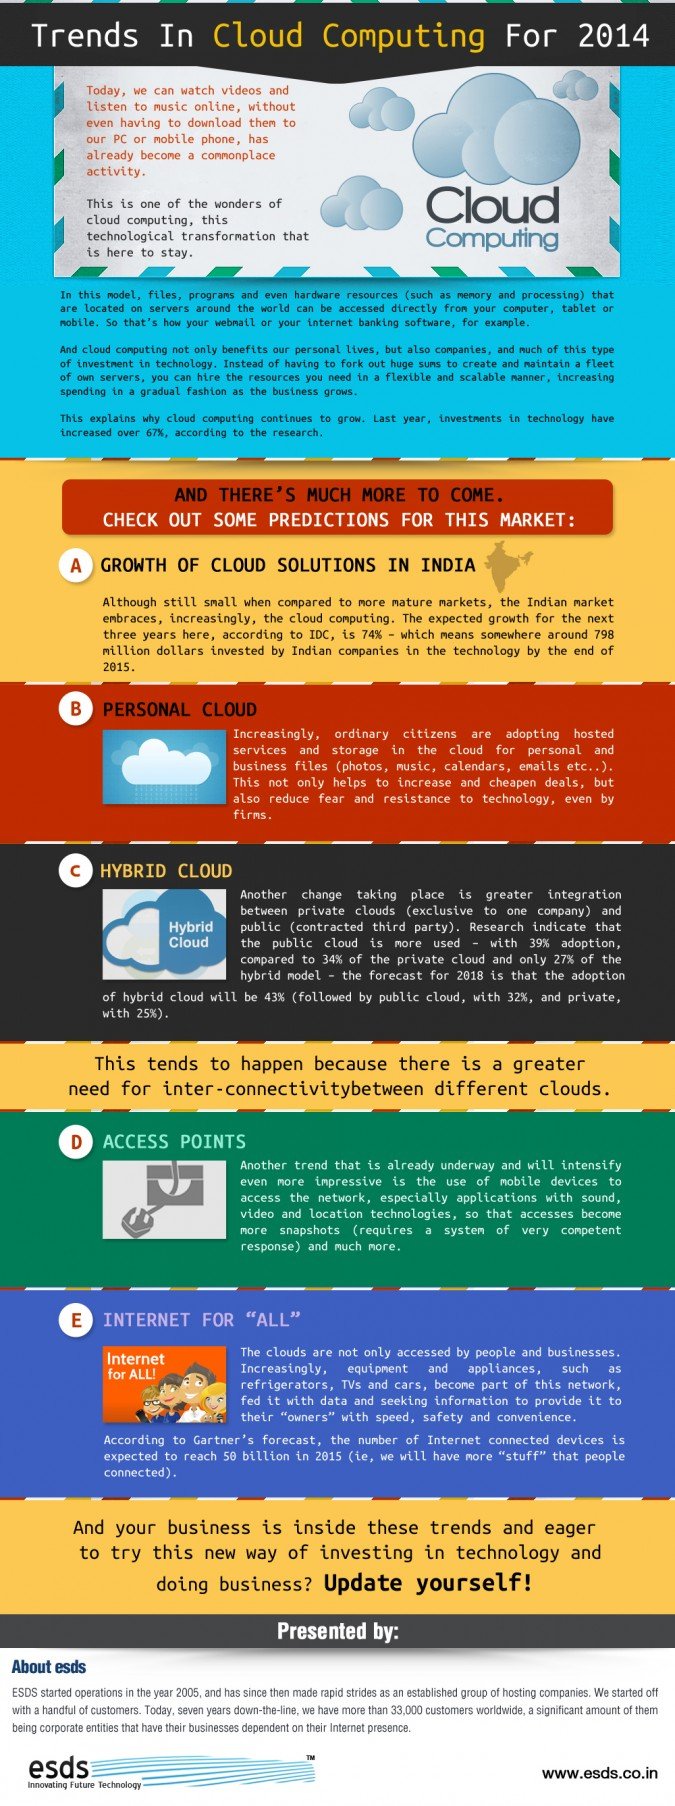 Trends-In-Cloud-Computing-For-2014-infographic